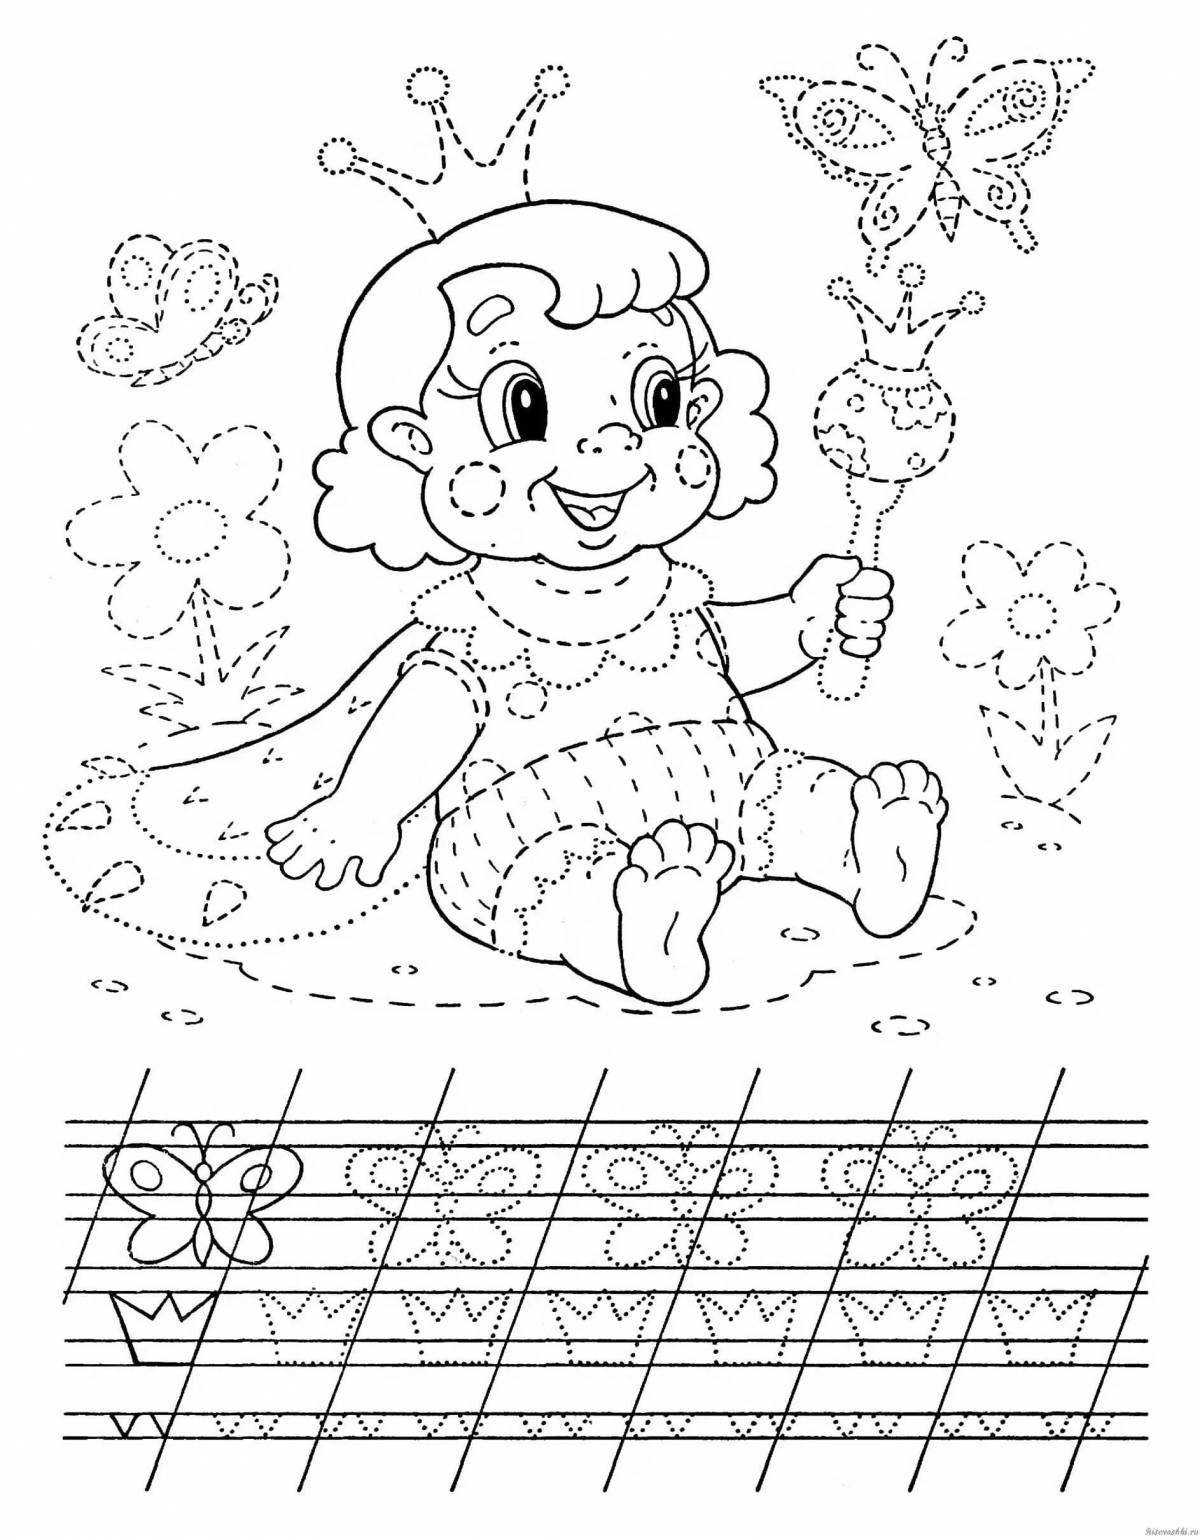 Colorful recipe coloring page for 5 year olds